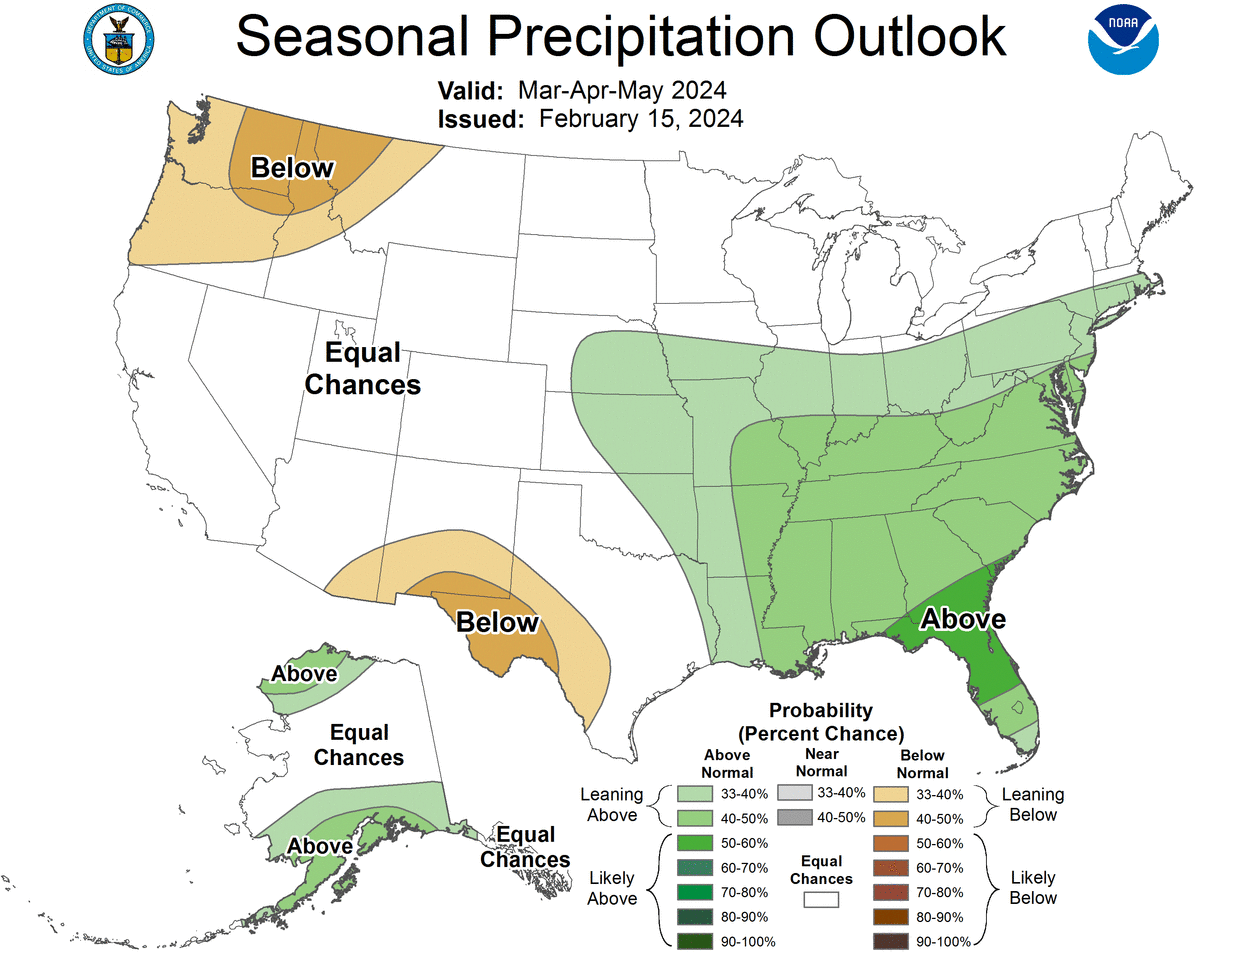 Most of Texas has a normal chance for rainfall this spring.